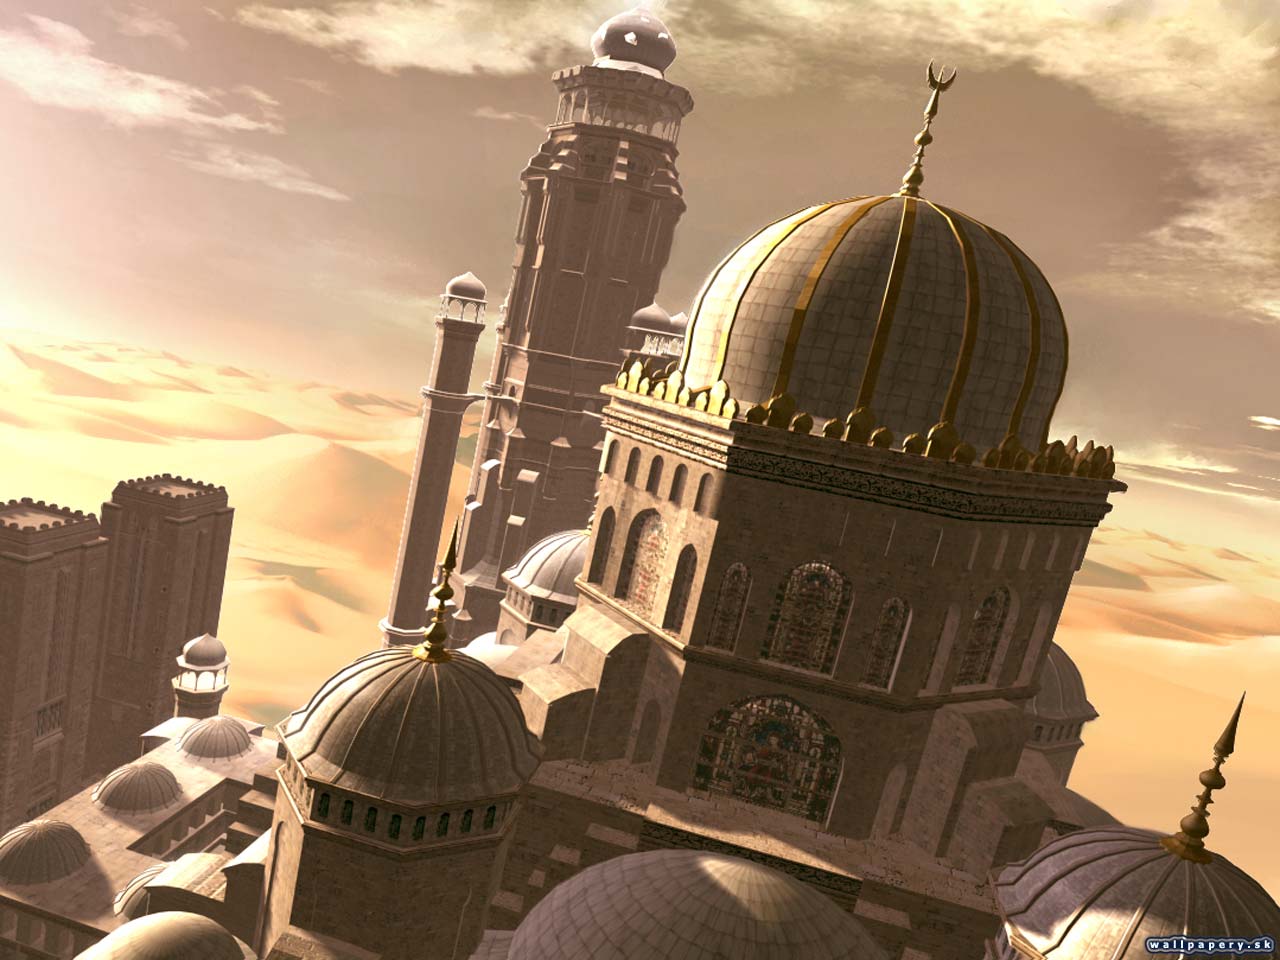 Prince of Persia: The Sands of Time - wallpaper 3